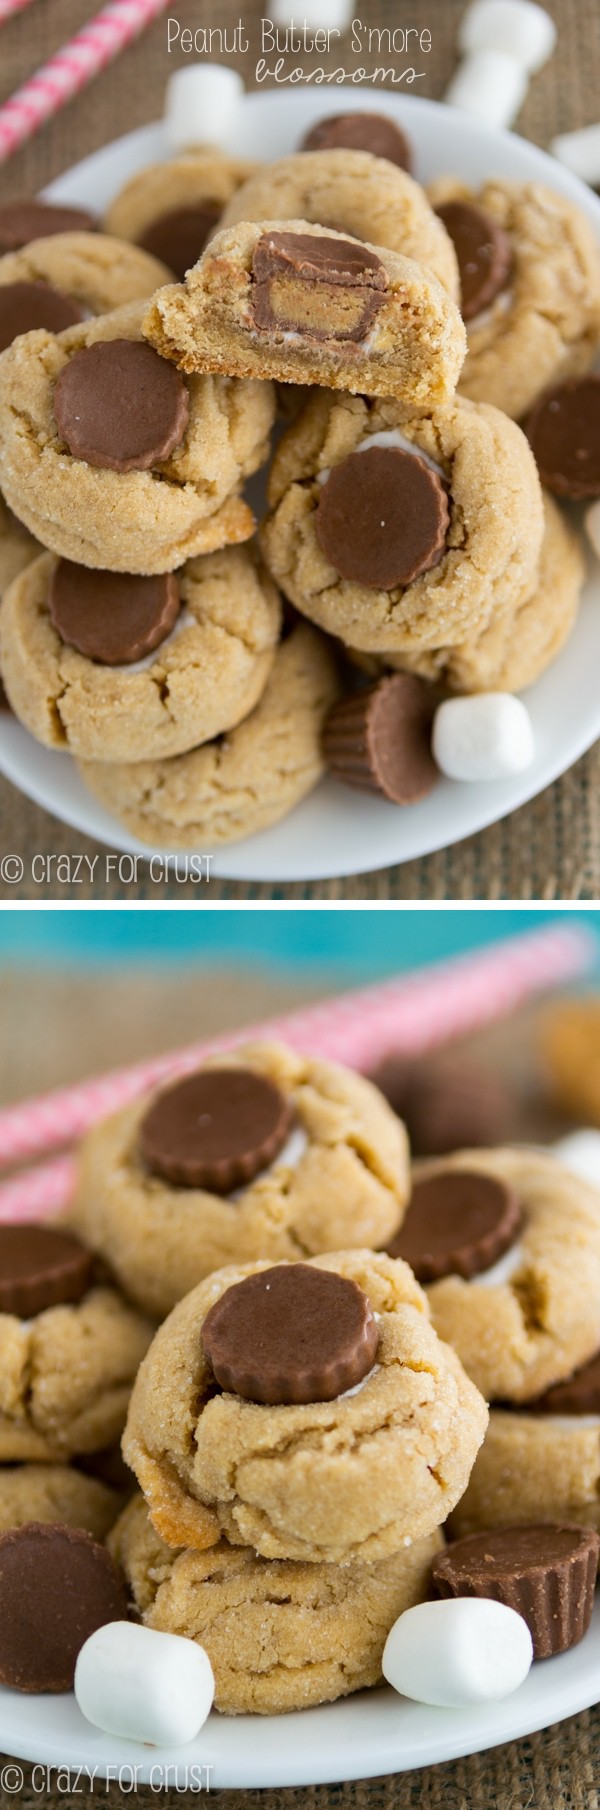 Peanut Butter S'more Blossoms collage